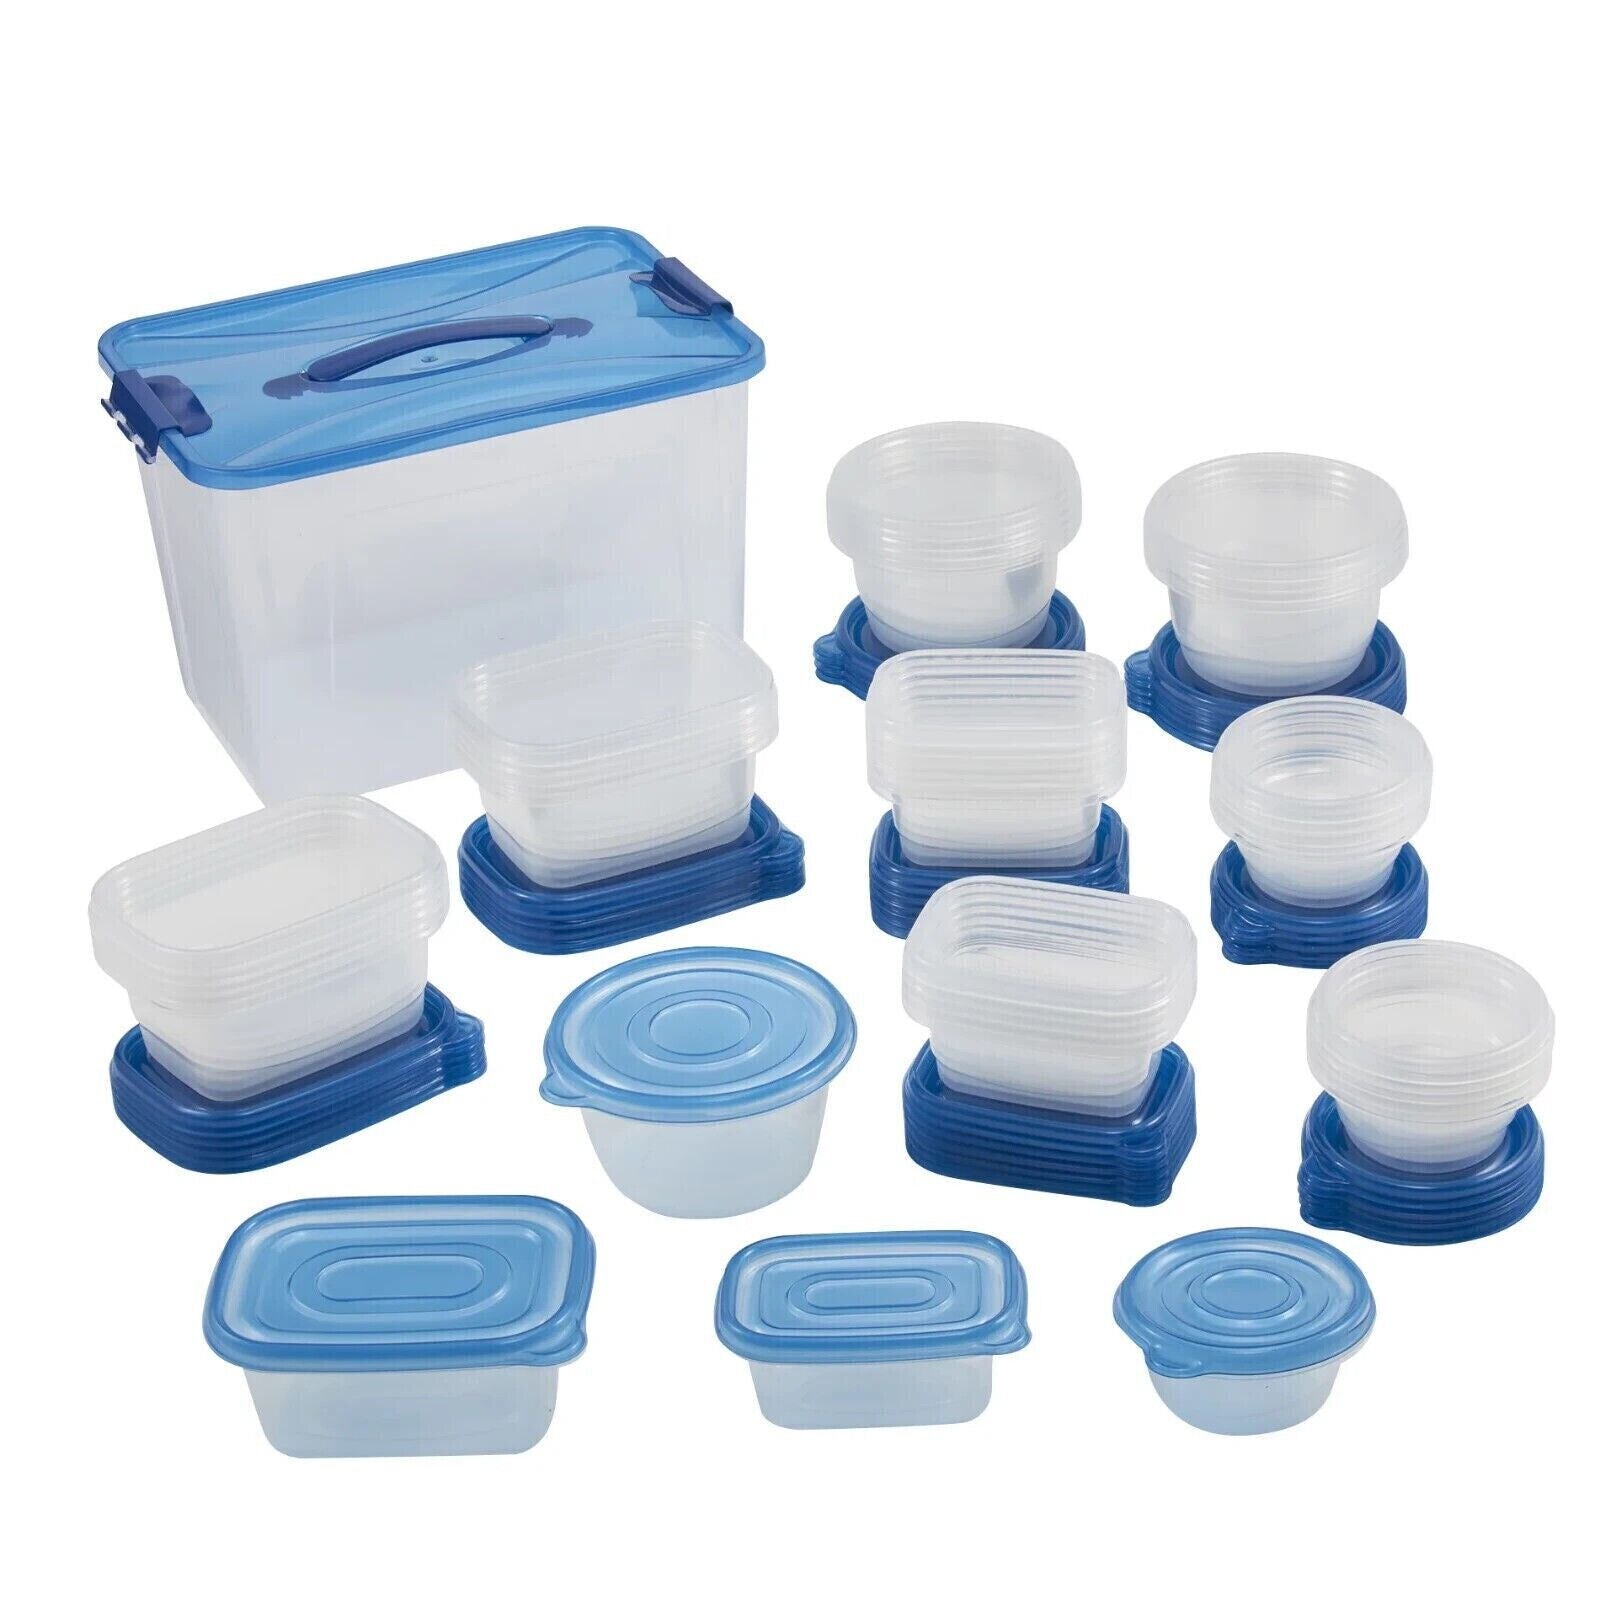 92 Piece Plastic Food Storage Containers Set